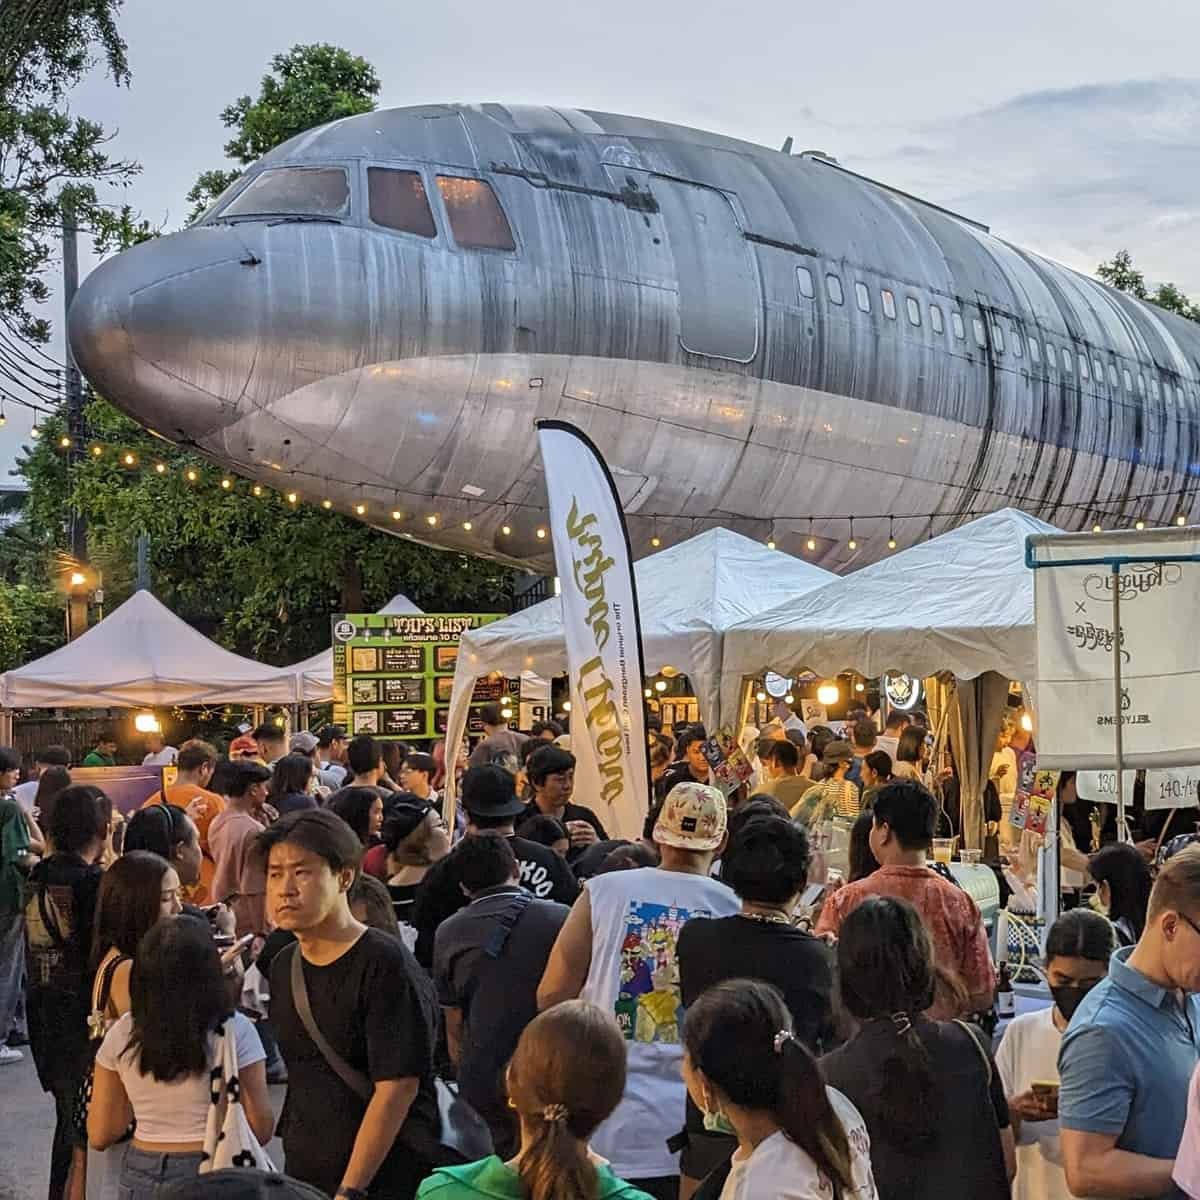 Beer Market 2 by ประชาชนเบียร์ (Beer People) at Chang Chui Creative Park in Bangkok. Large airplane above the brewery tents and beer drinking crowd in Thailand's capital.